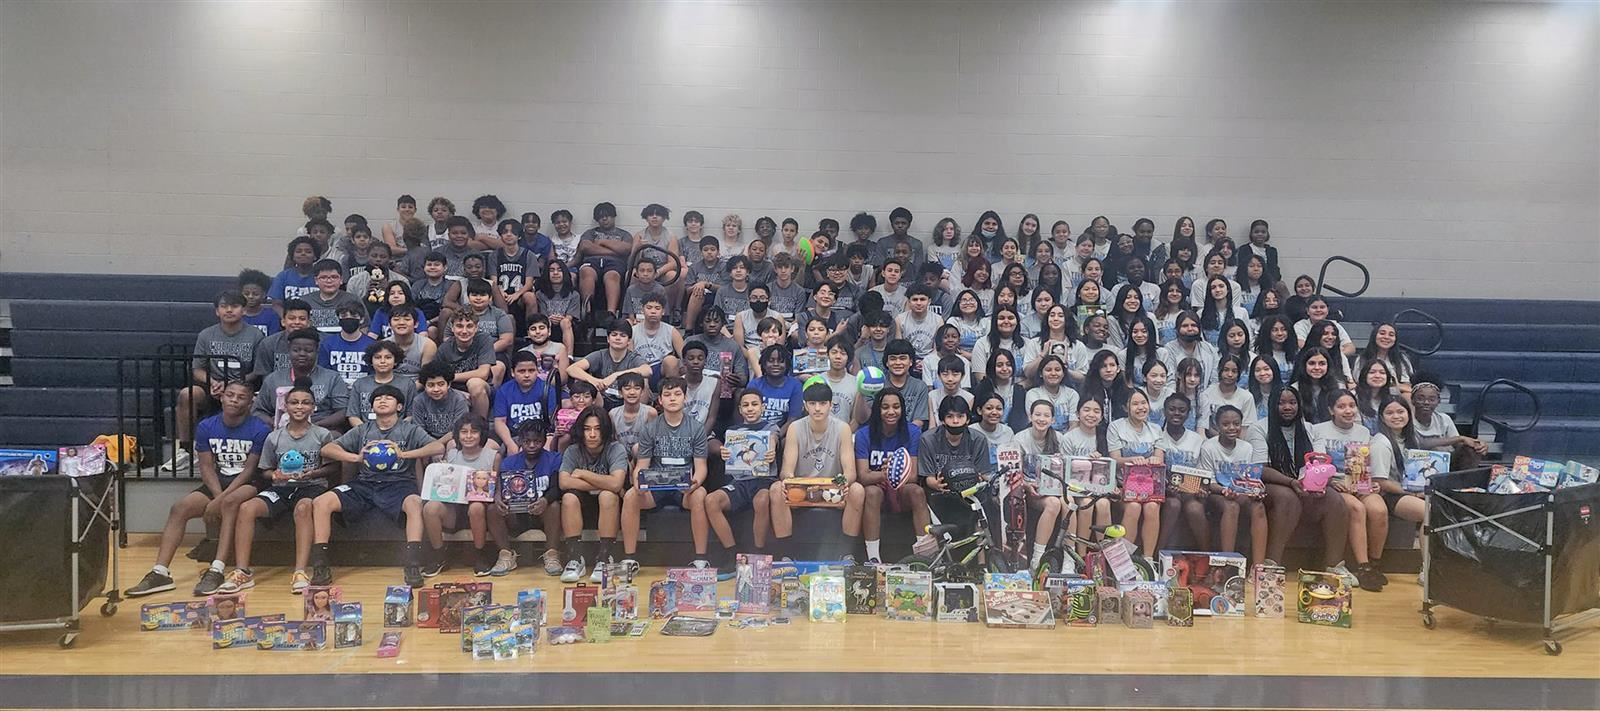 Truitt Middle School participates in CALI BEAR toy drive.